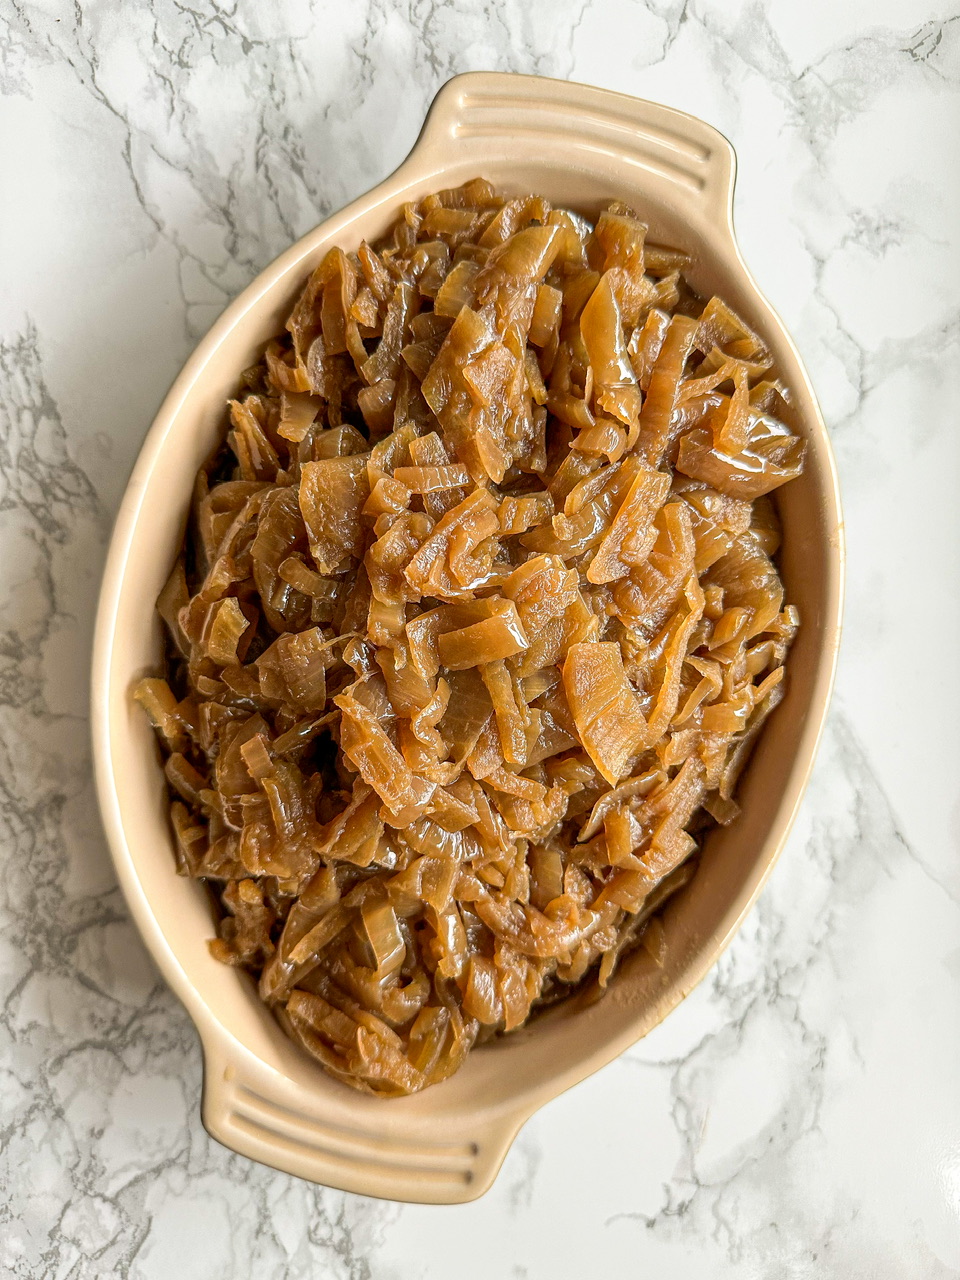 Slow Cooker Caramelized Onions made in a crock pot